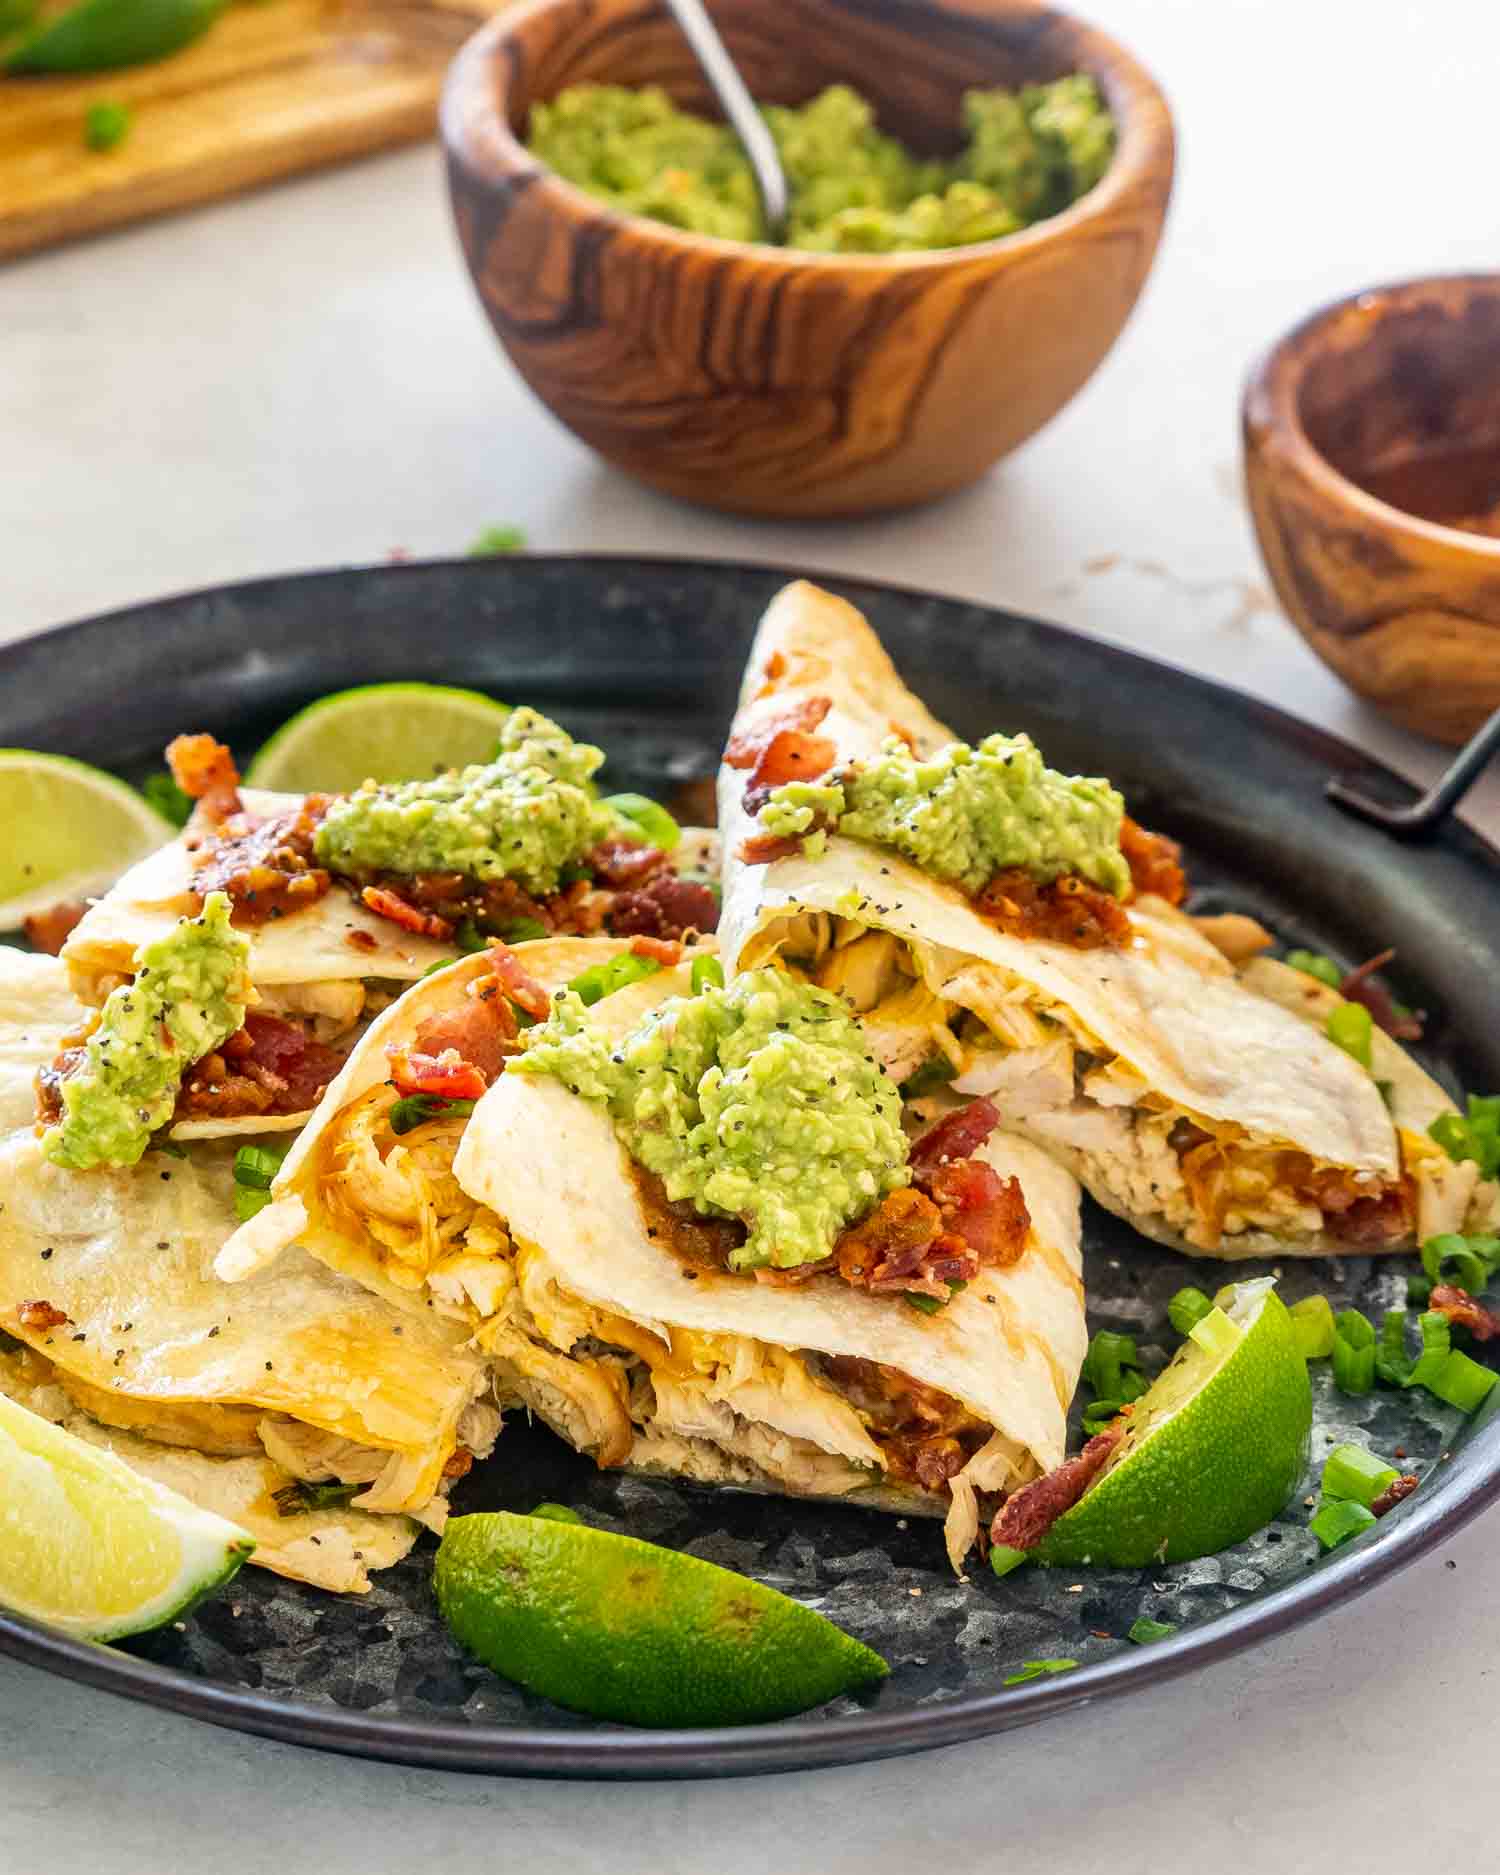 chicken quesadillas on a metal plate topped with avocado and salsa.